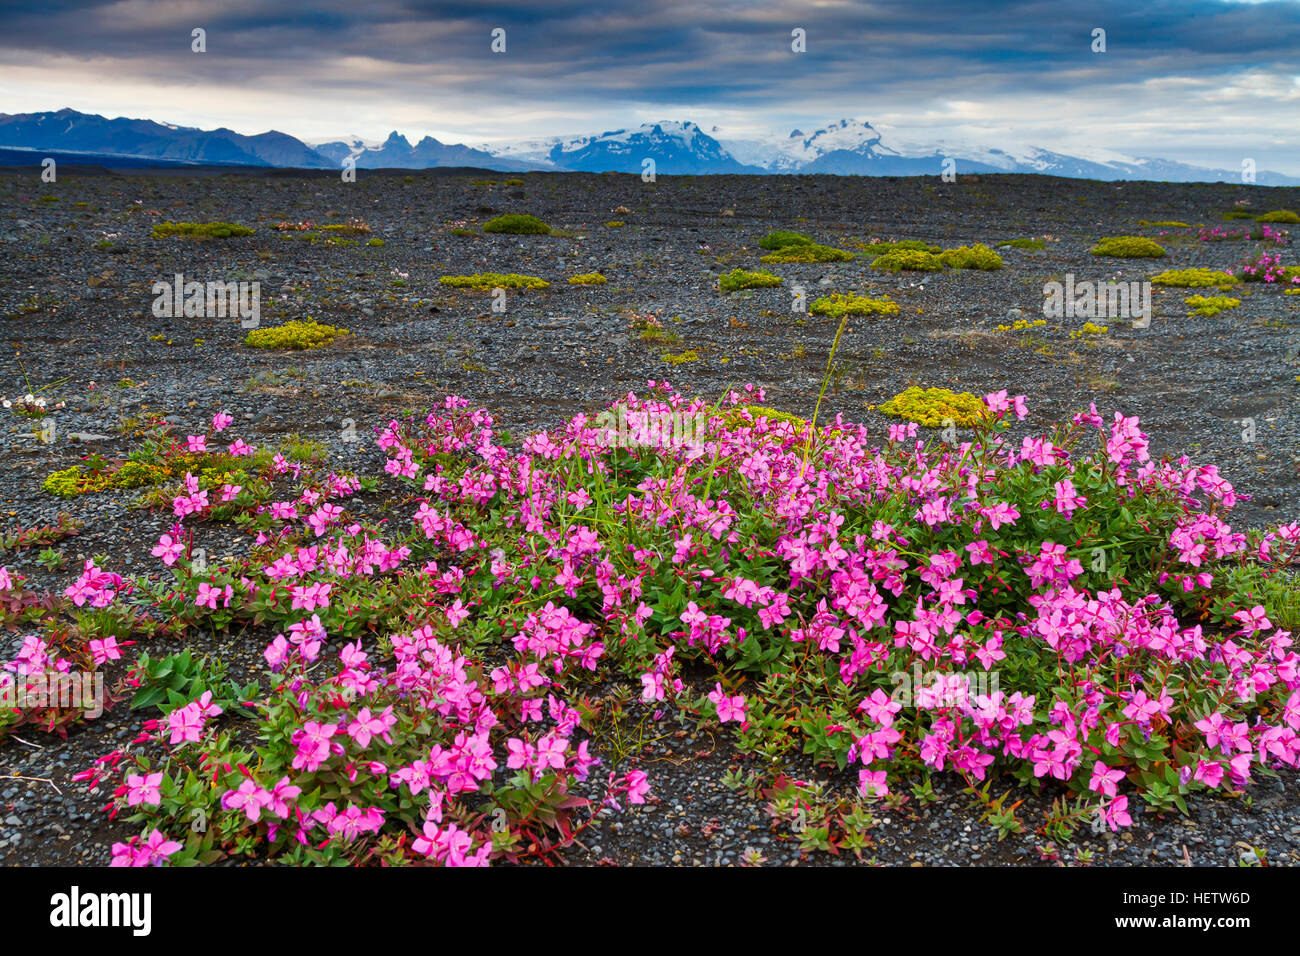 Dwarf Fireweed or River Beauty Willowherb (Chamerion latifolium) in volcanic ground. Iceland, Europe Stock Photo